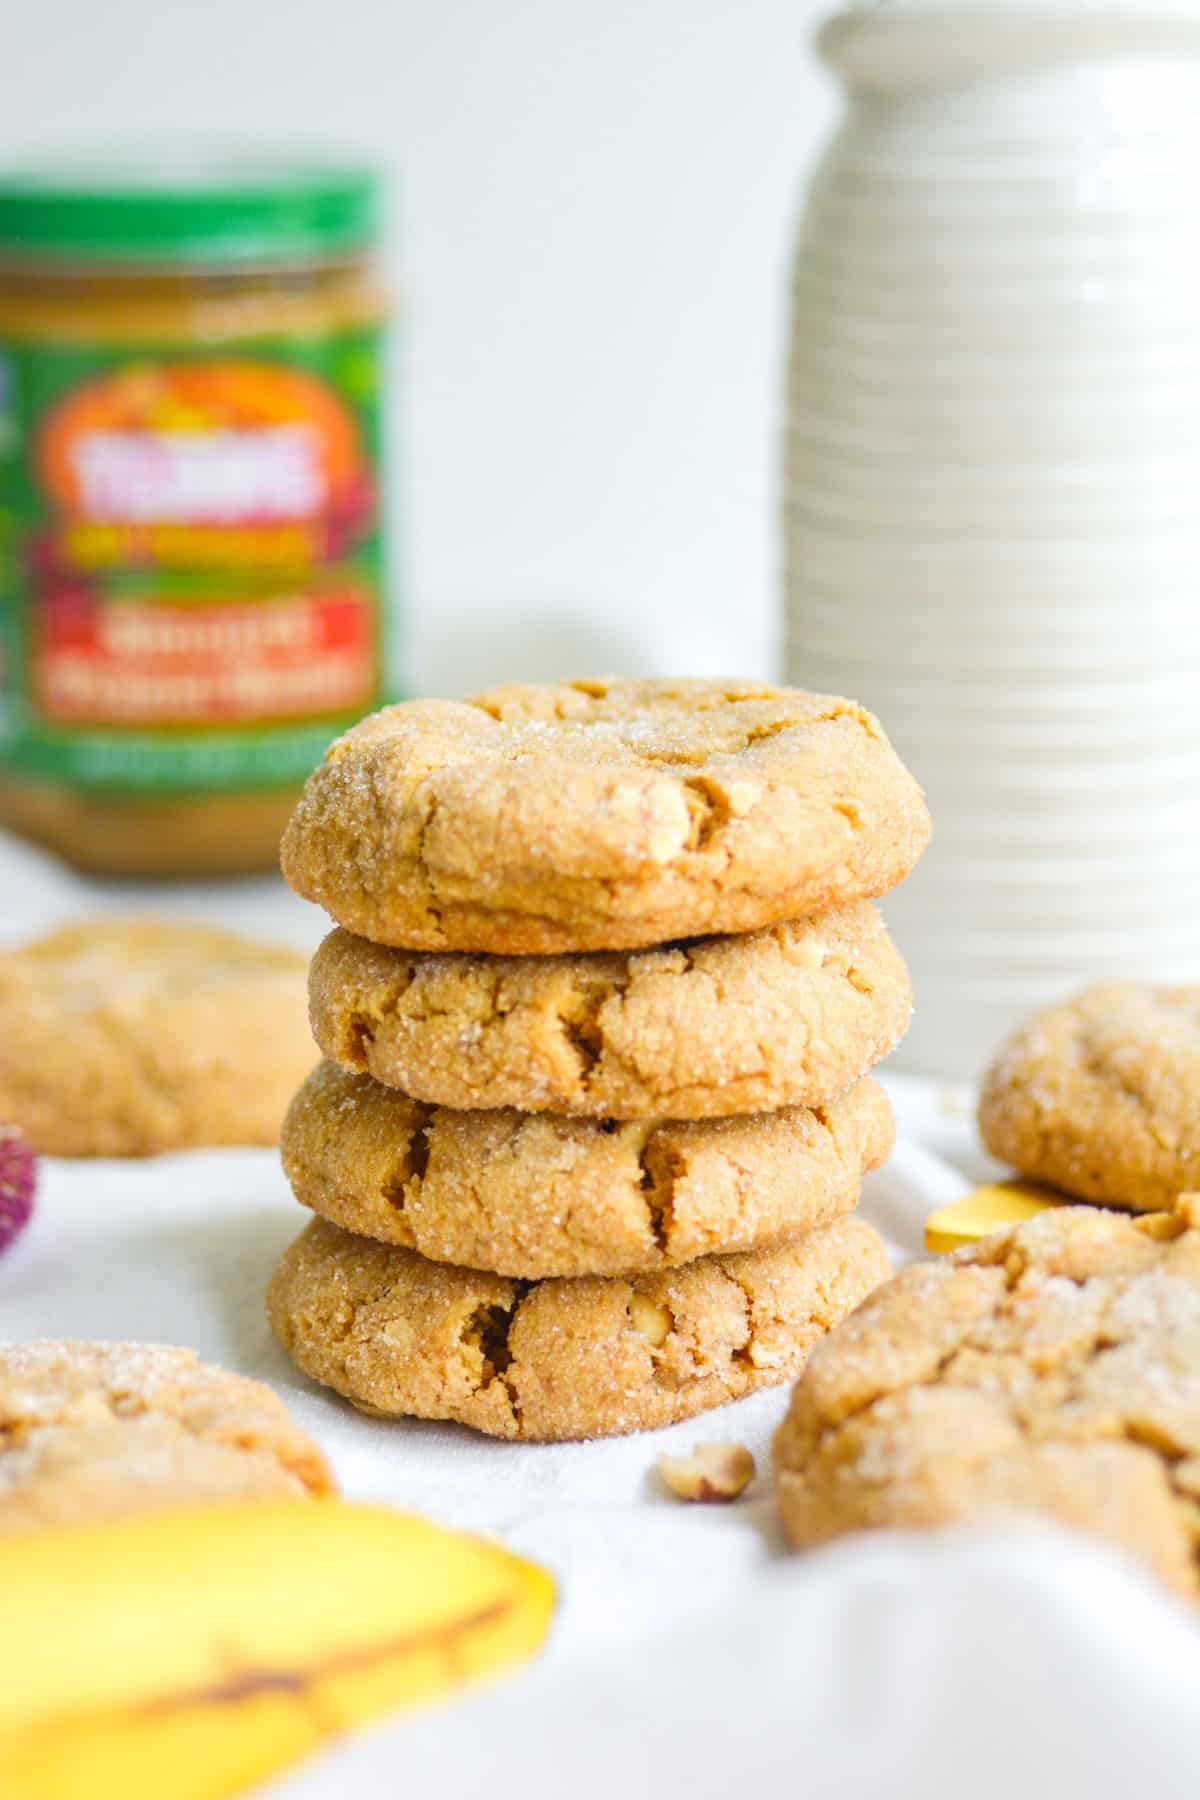 A stack for four vegan peanut butter banana cookies on top of each other on a whit cloth.